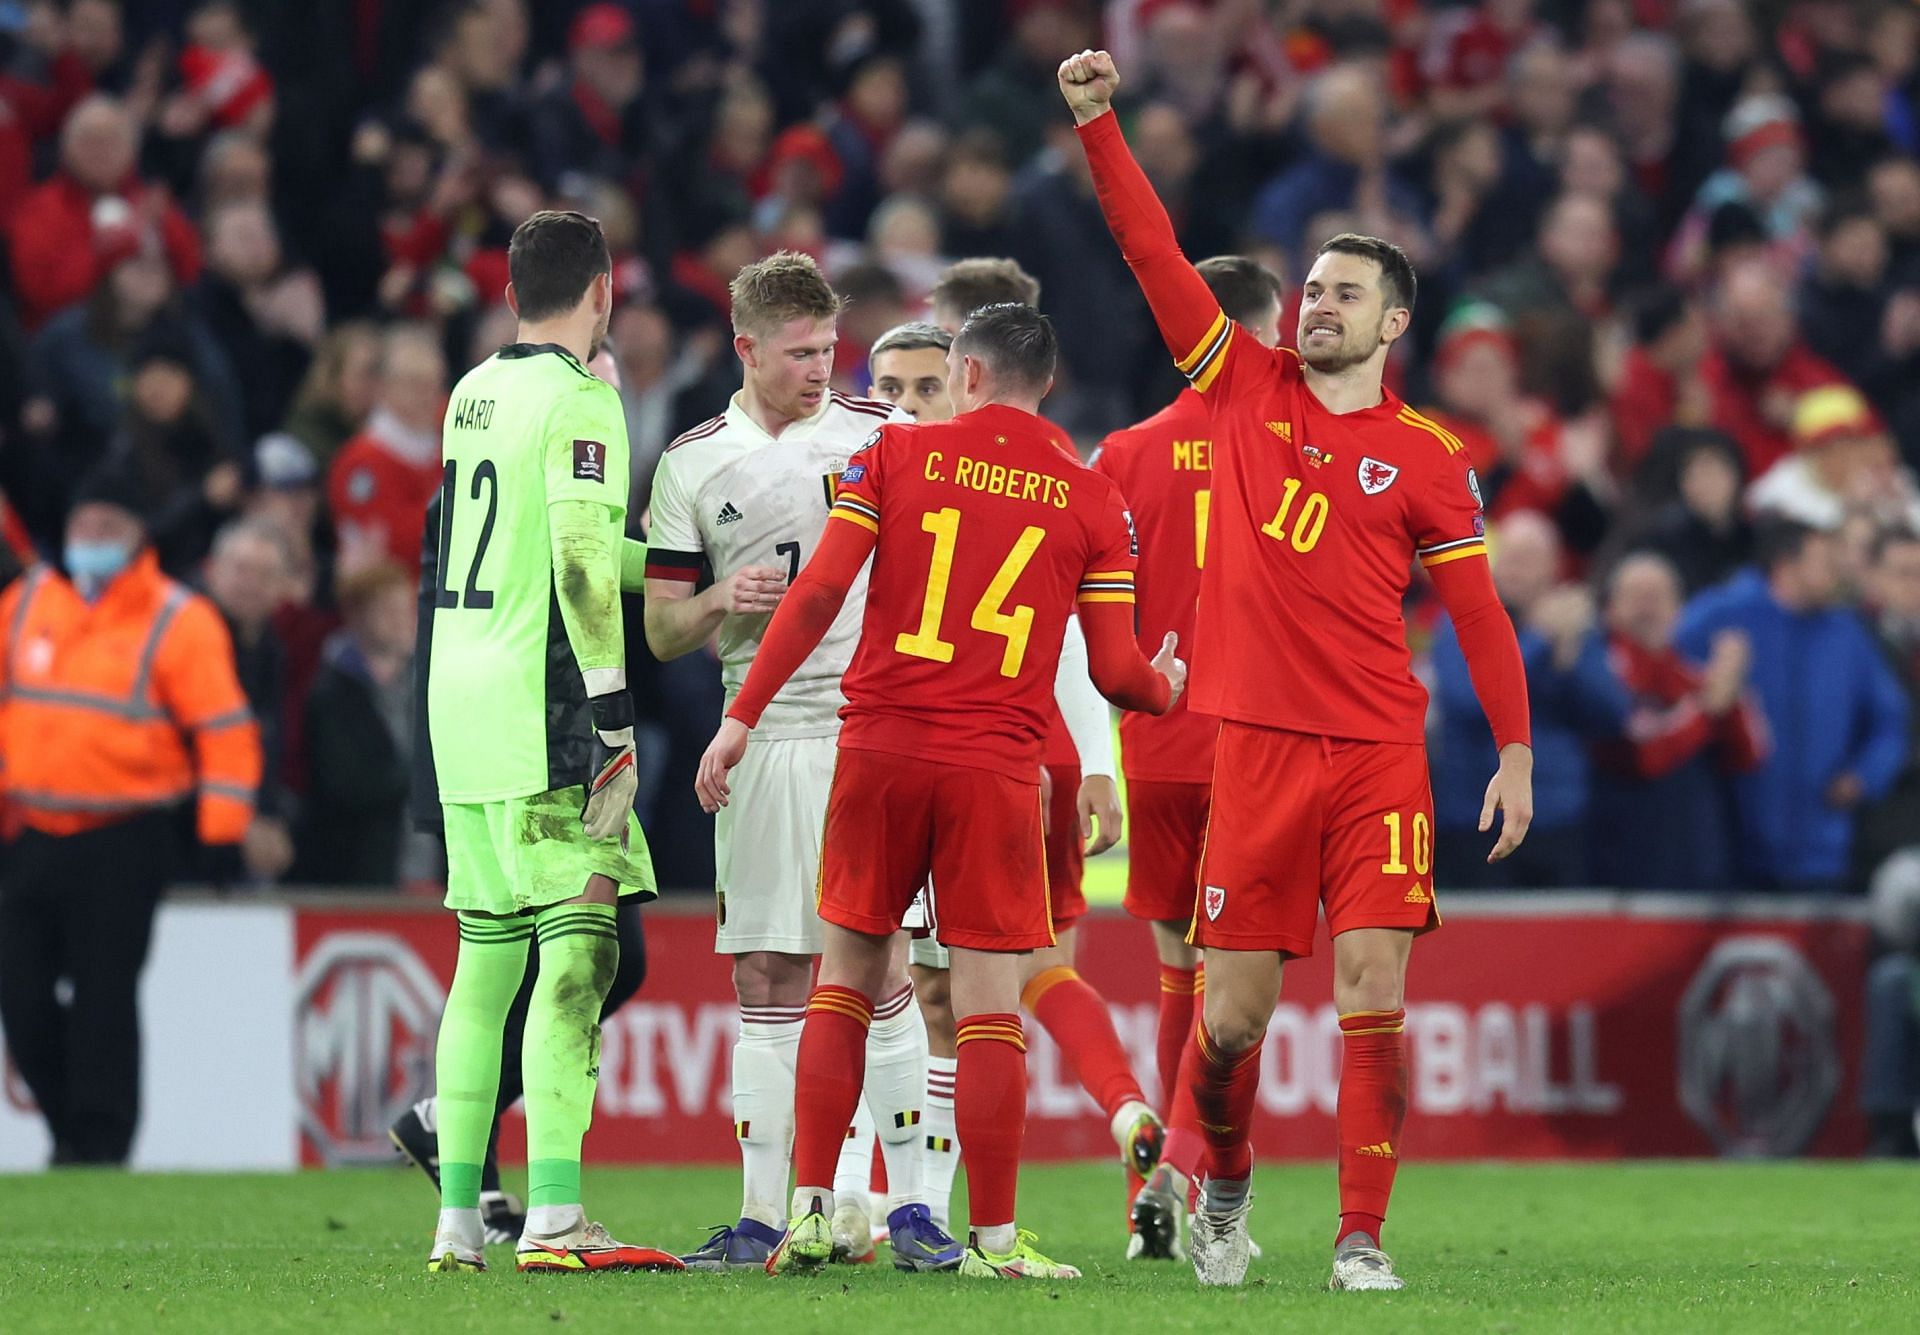 Wales v Belgium - 2022 FIFA World Cup Qualifier